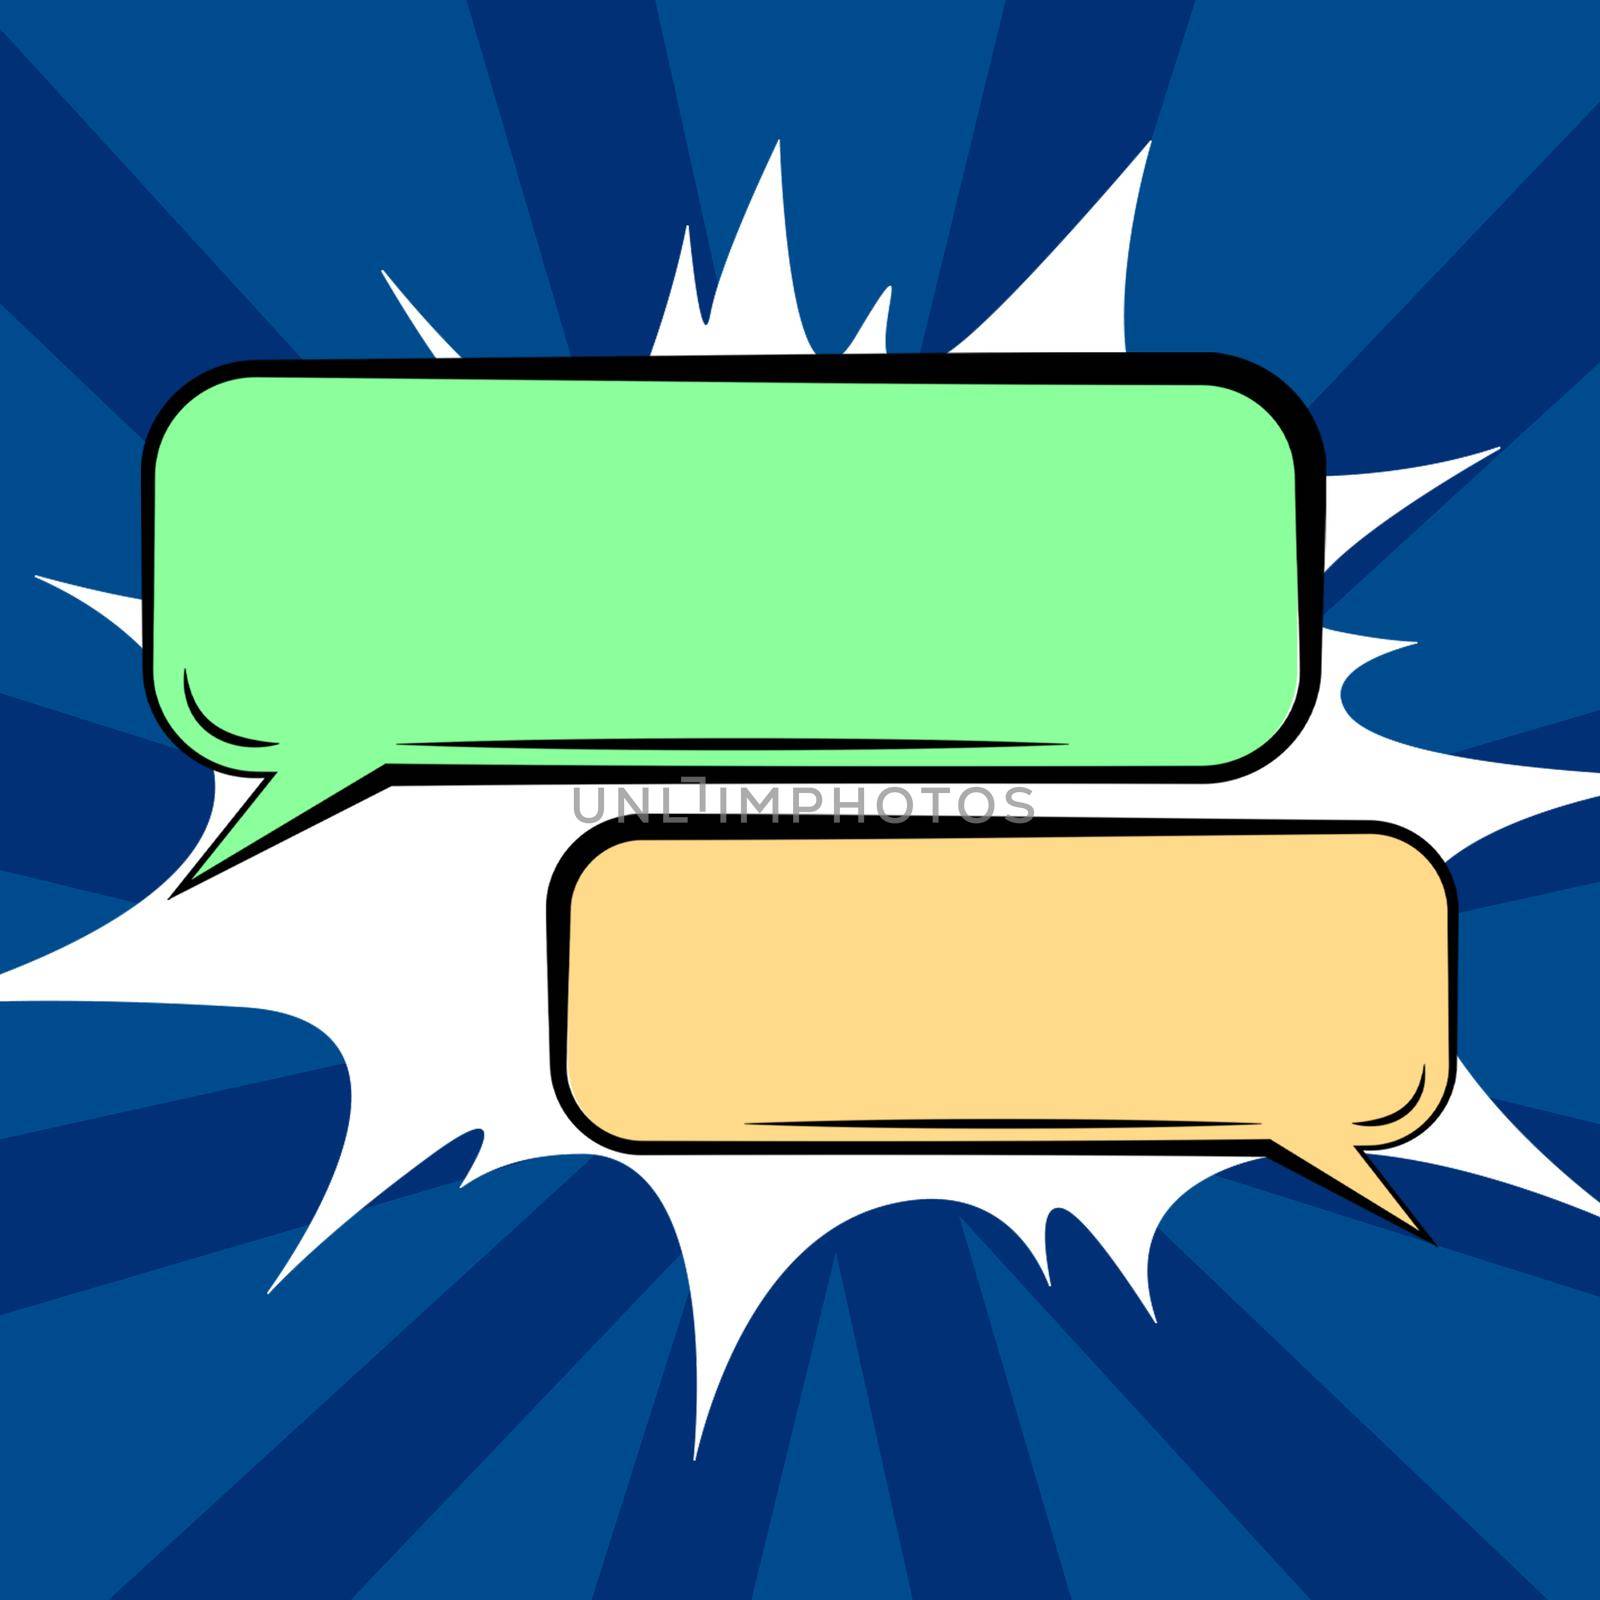 Pair Of Blank Color Speech Bubbles Of Rectangular Shape With Copy Space Over Color Background. Empty Chat Boxes S Representing Social Media Communication And Connection. by nialowwa